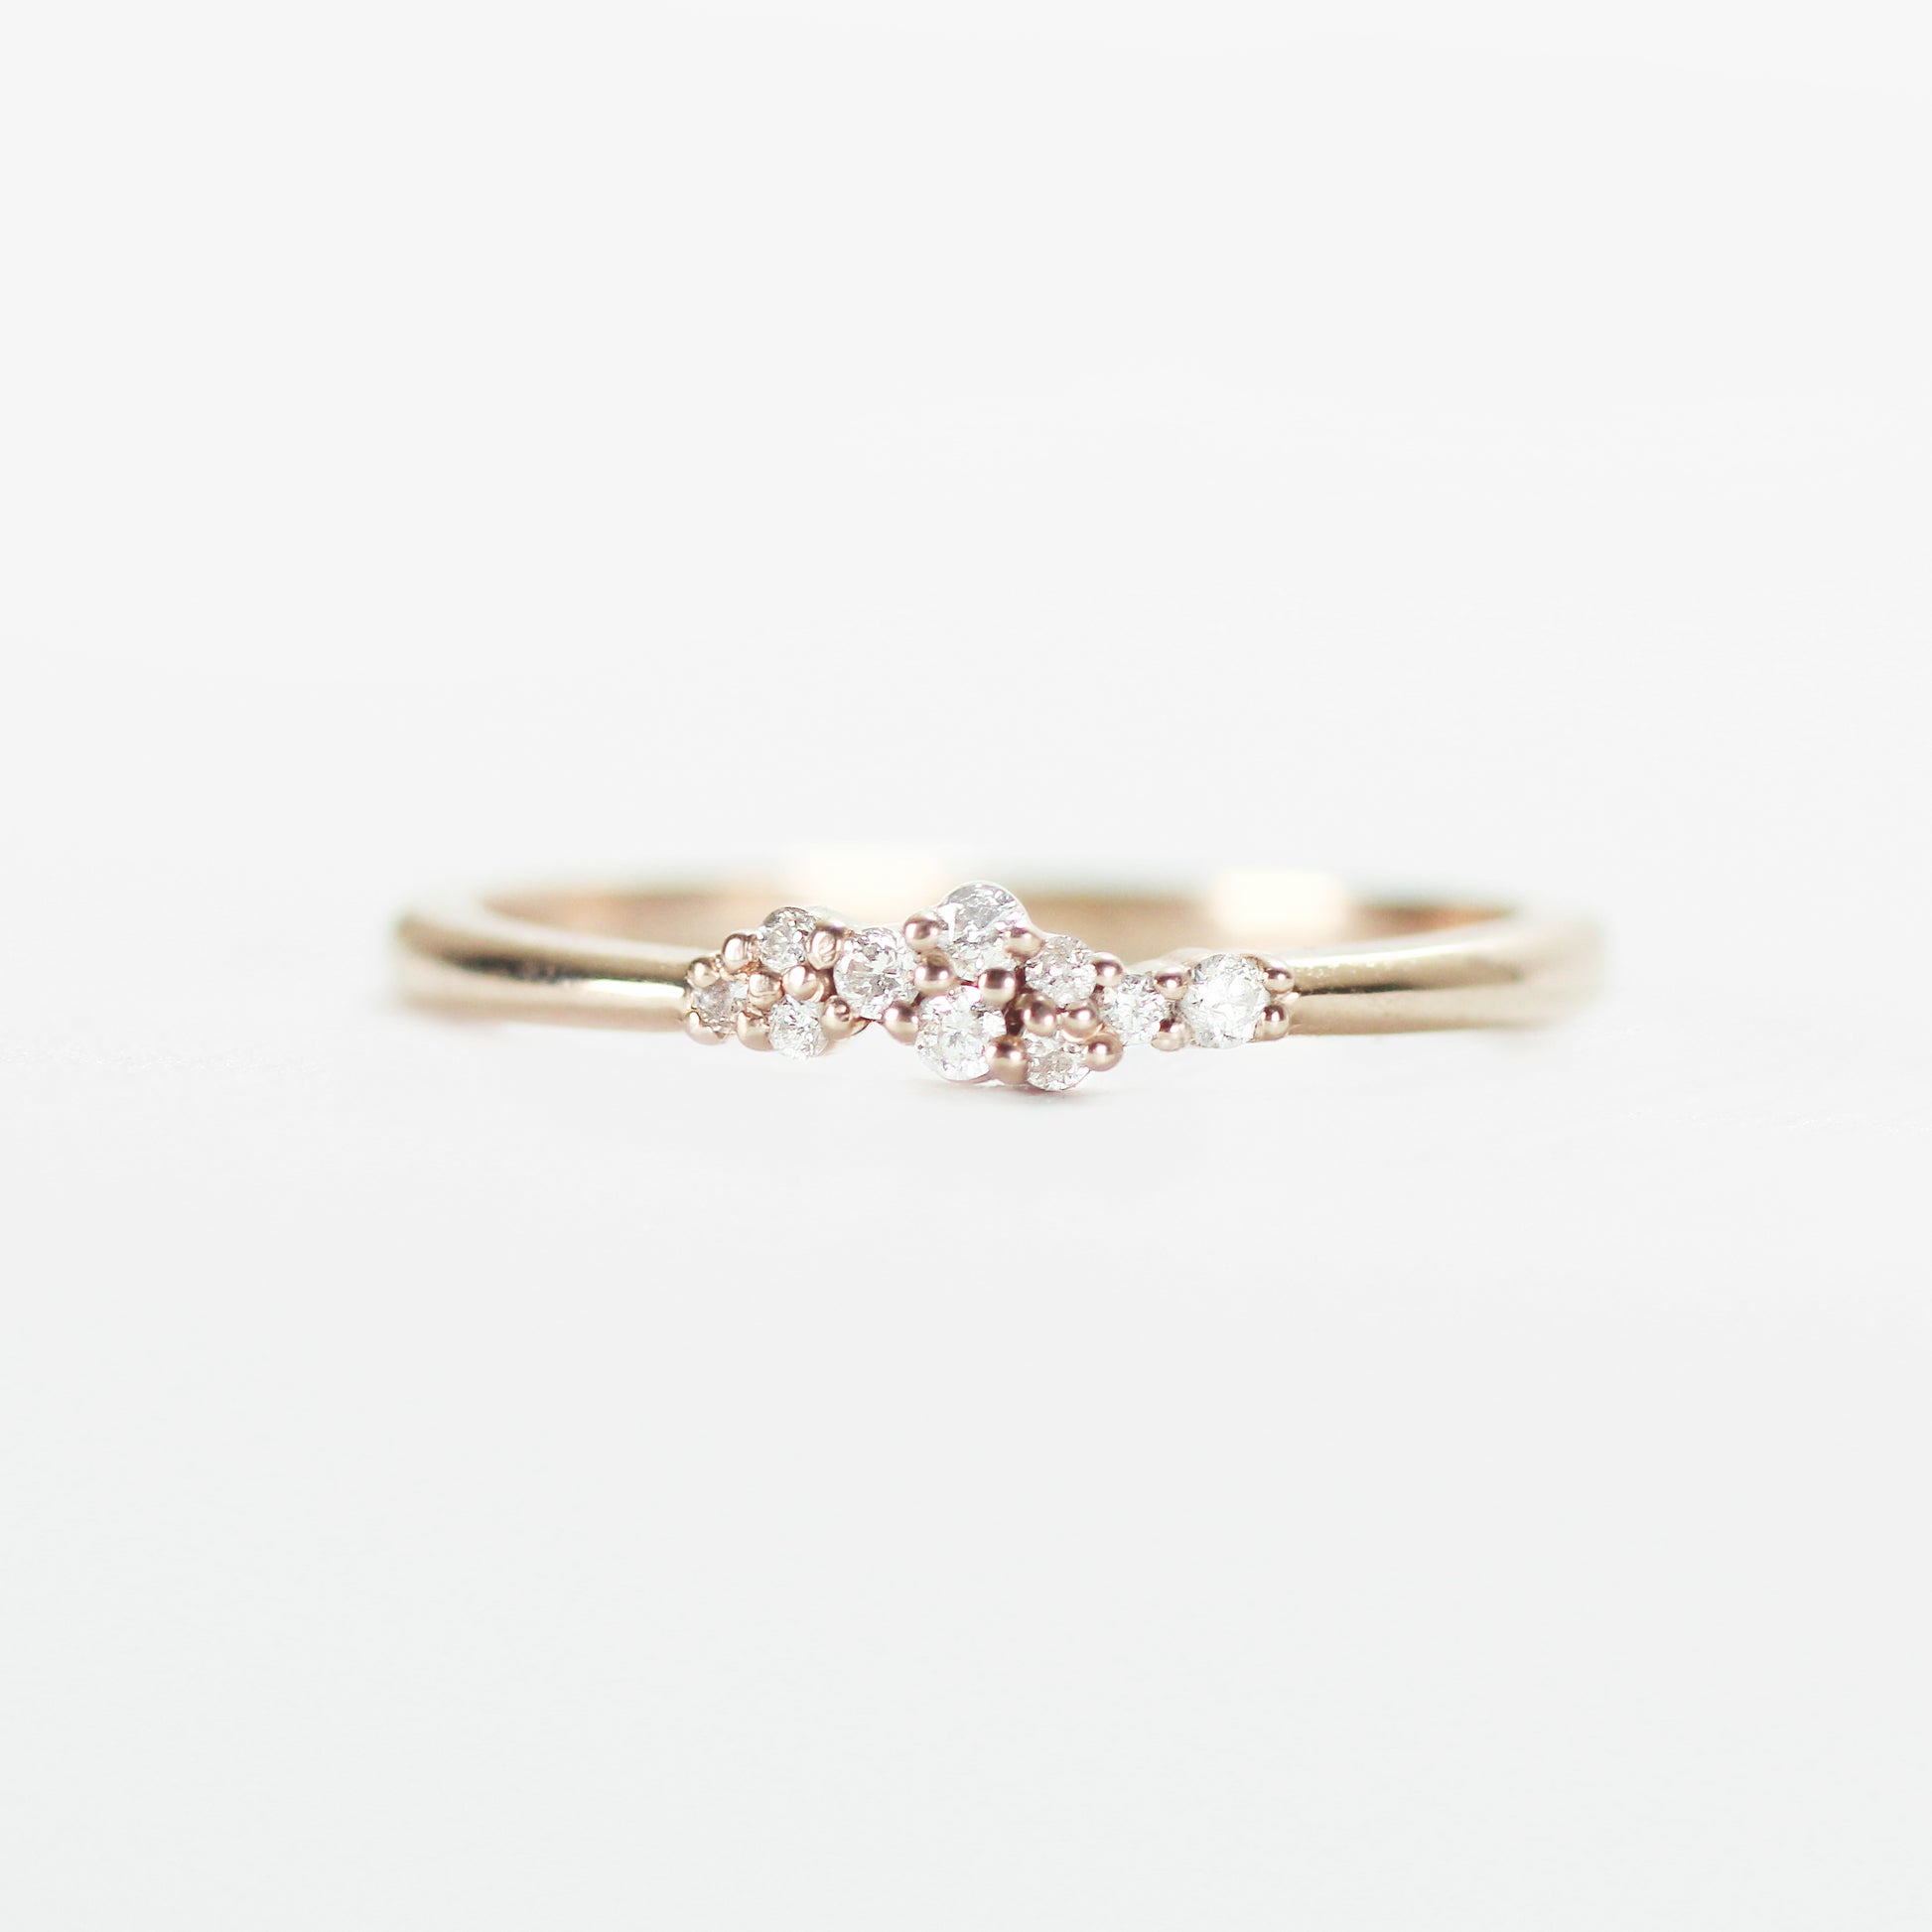 Fiona - Cluster style diamond band - Midwinter Co. Alternative Bridal Rings and Modern Fine Jewelry